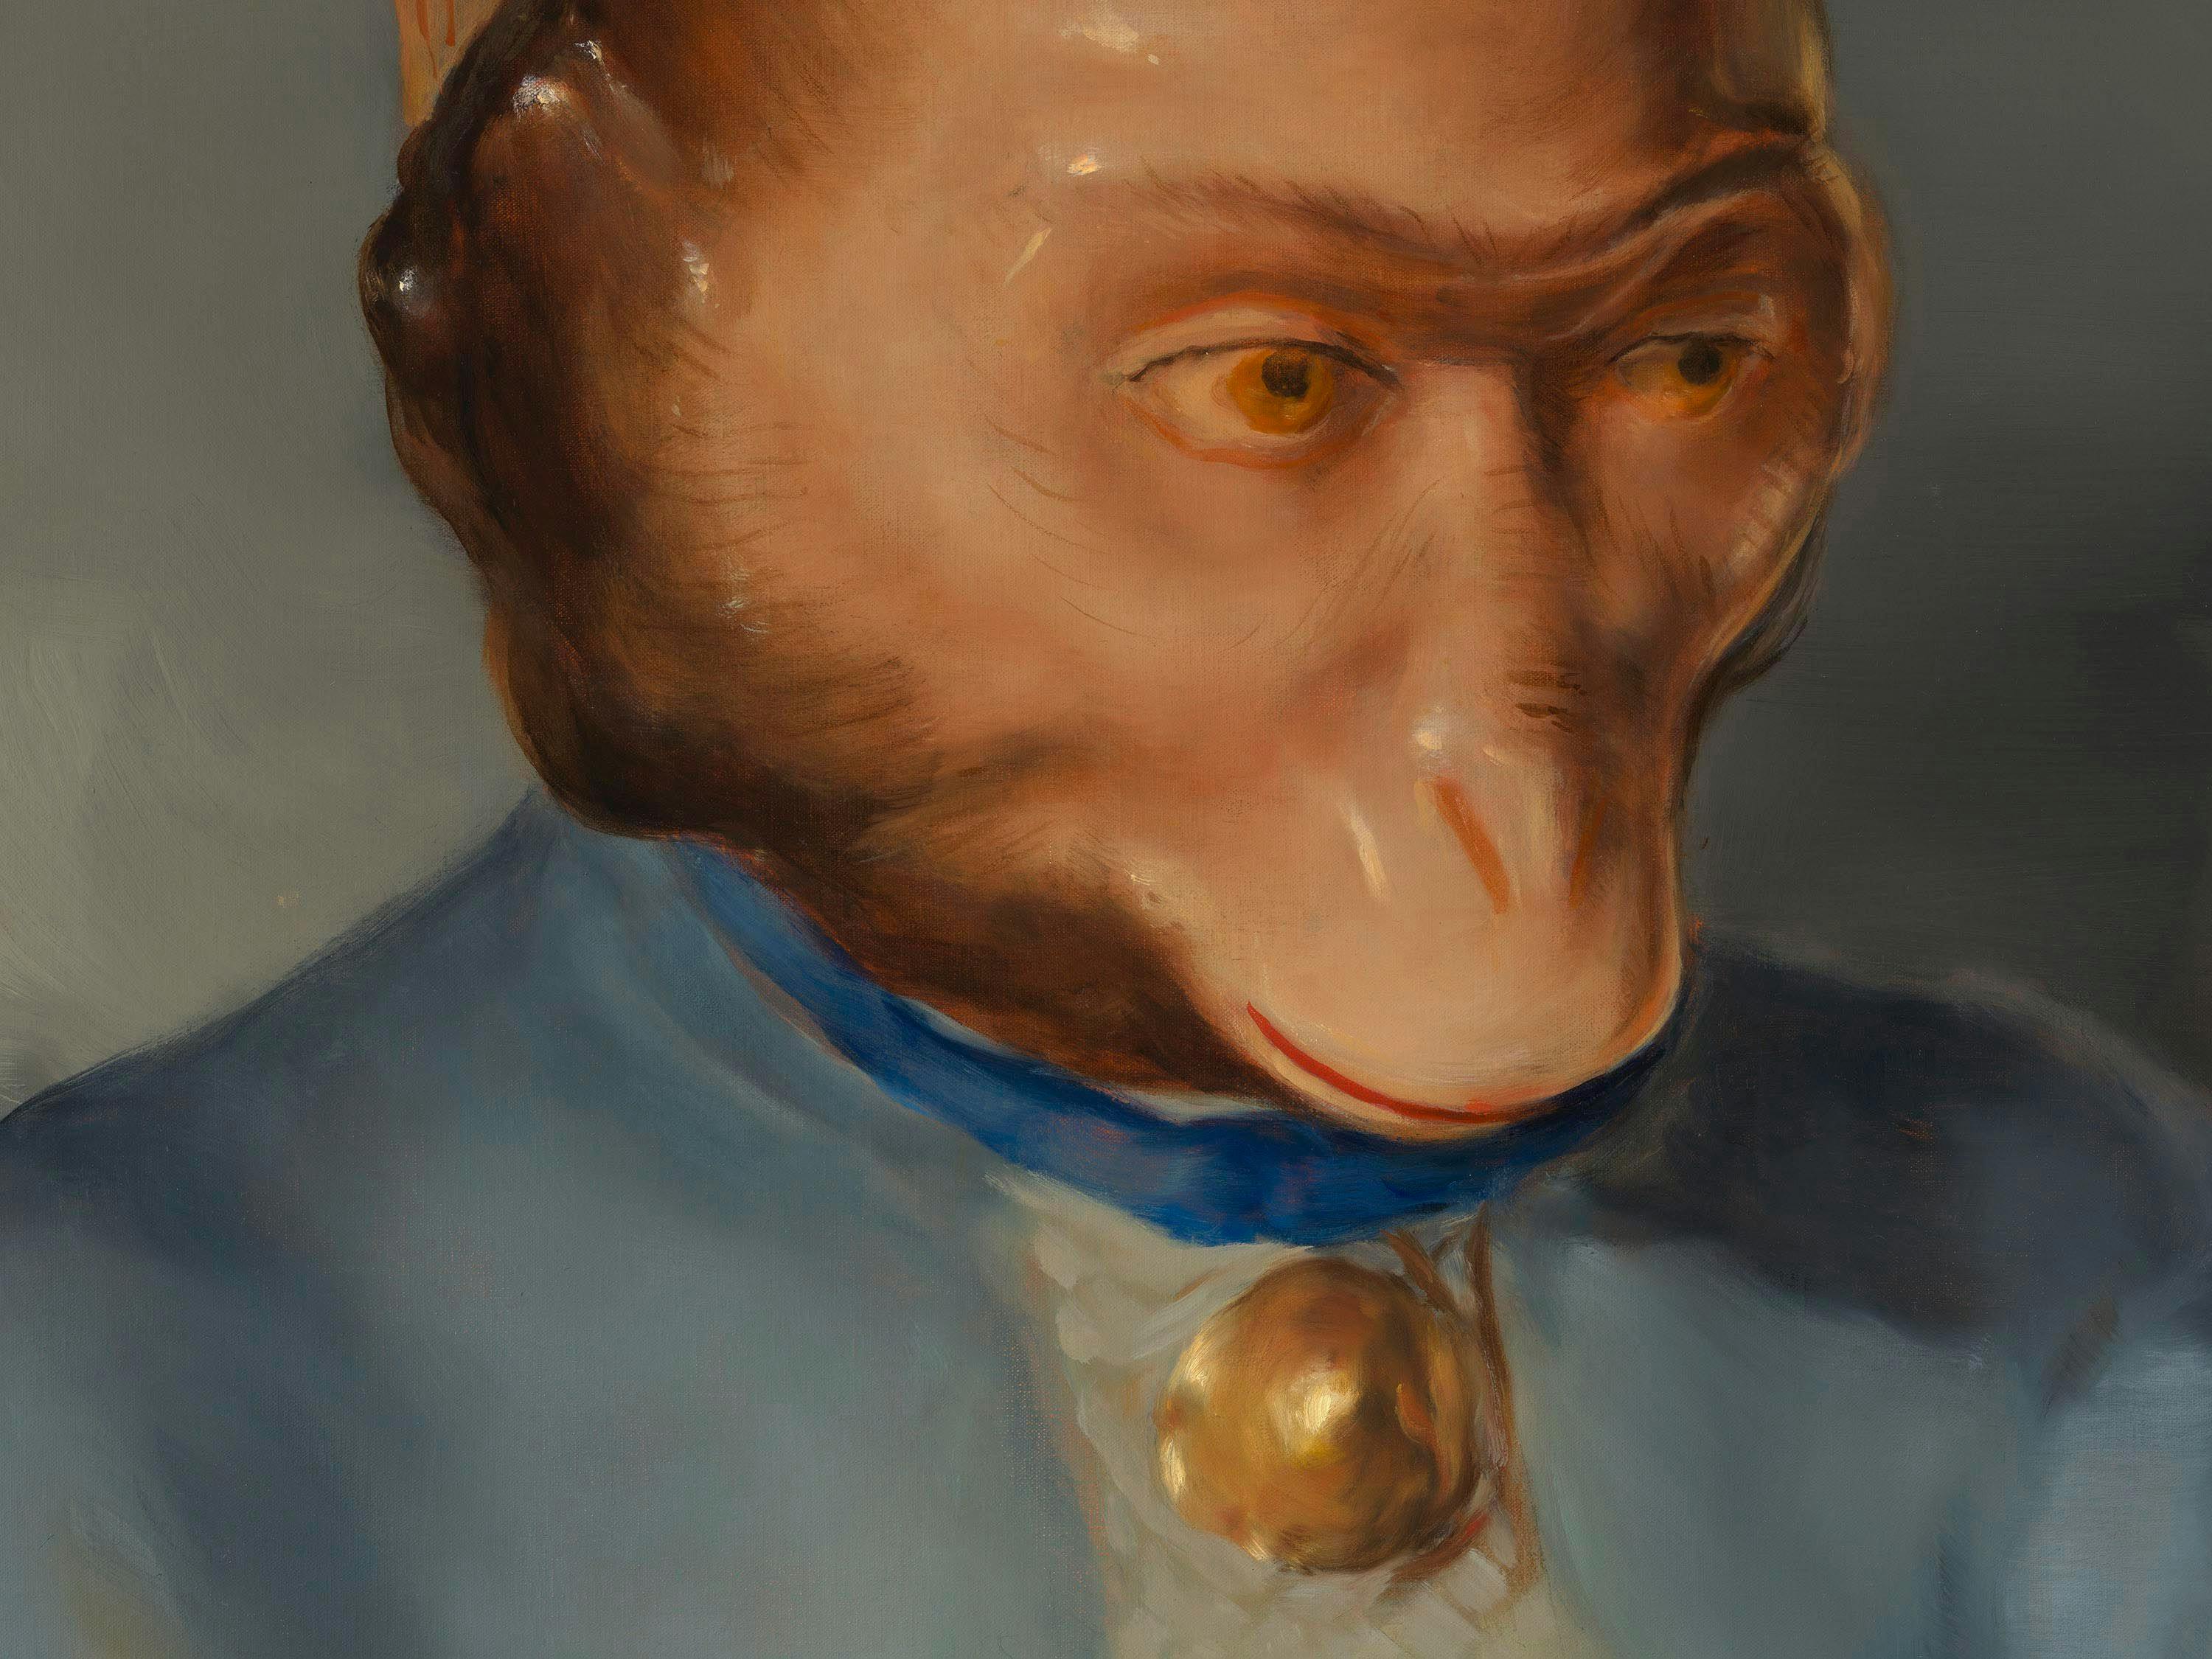 A detail from a painting by Michaël Borremans, titled The Monkey, dated 2023.